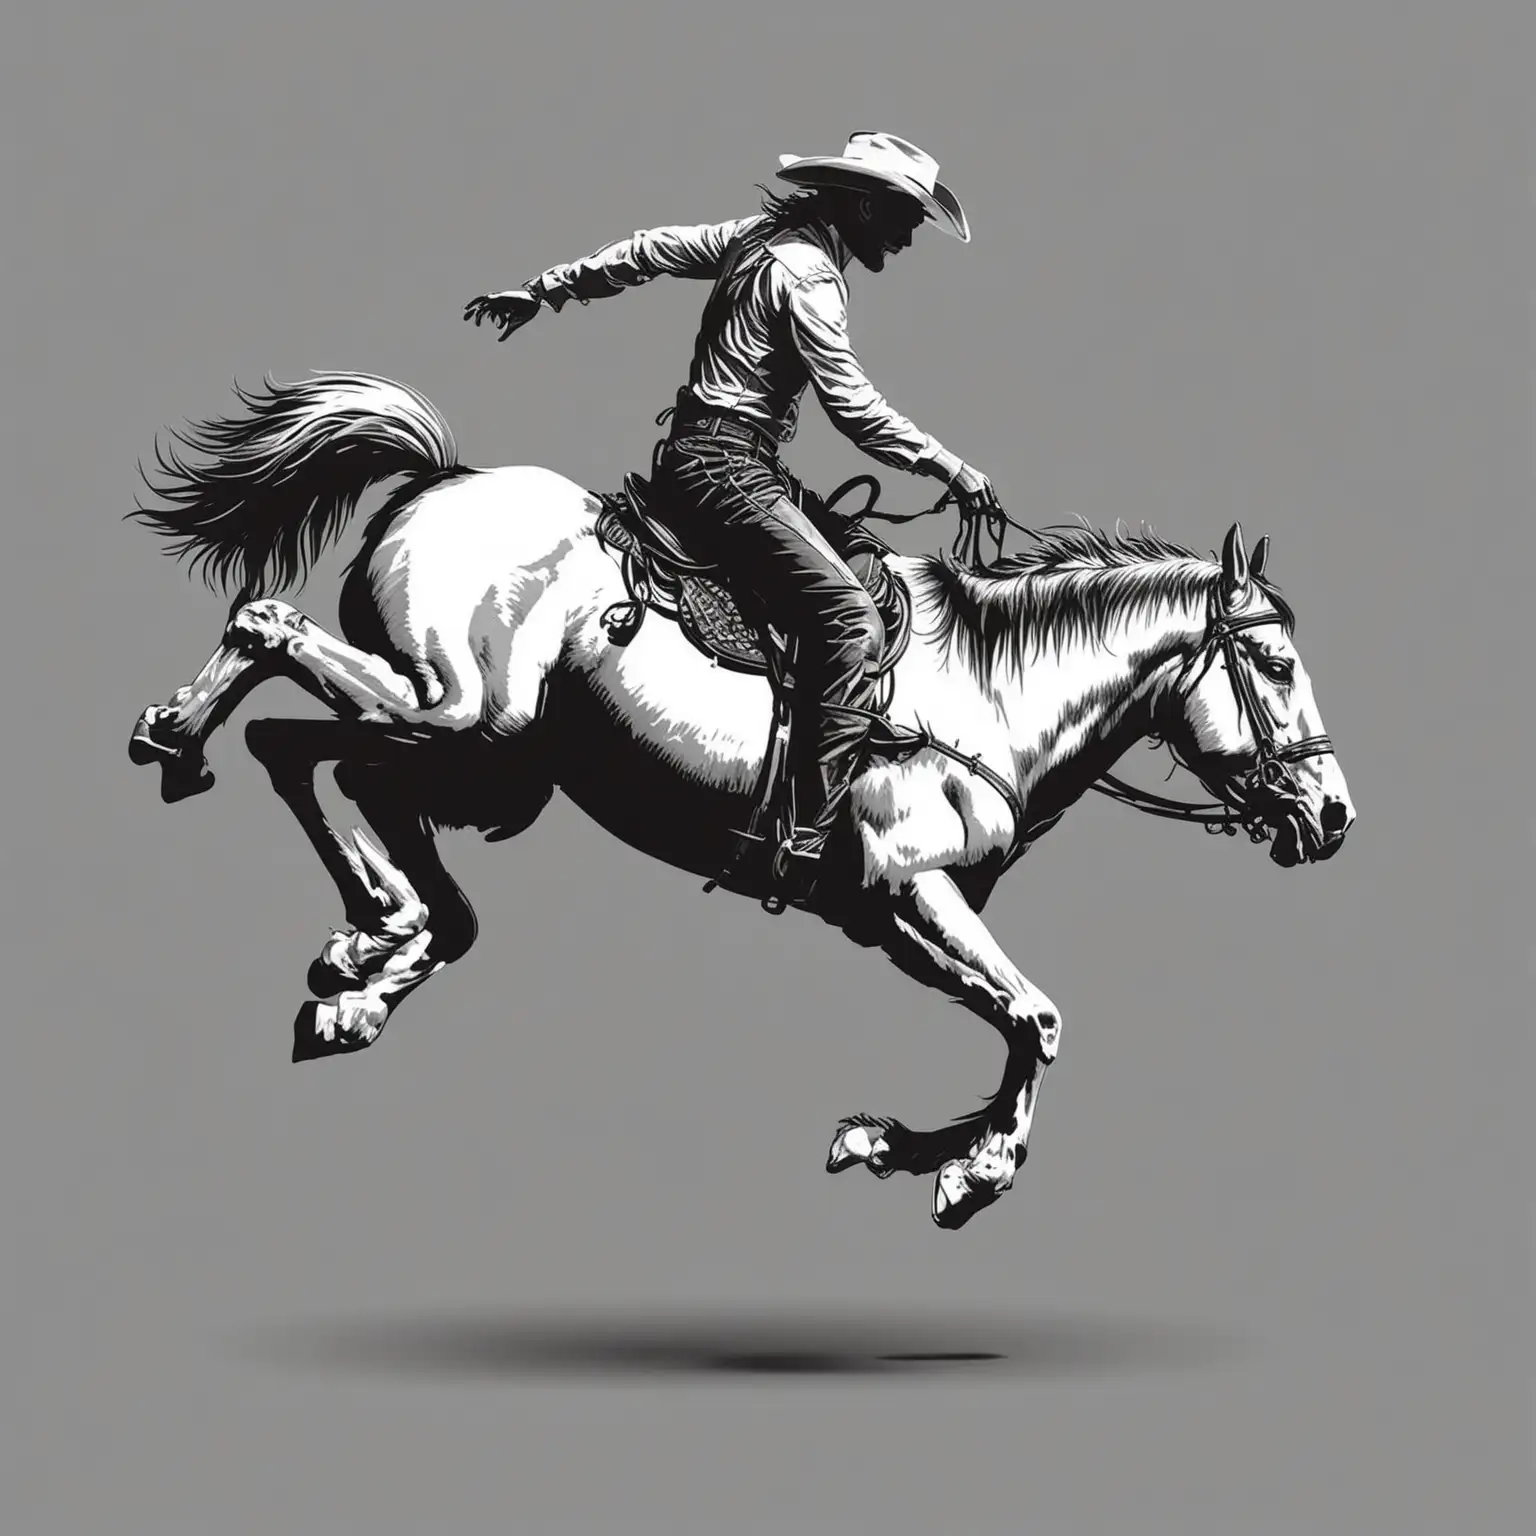 Simple Black and White Vector Illustration of a Bucking Bronco